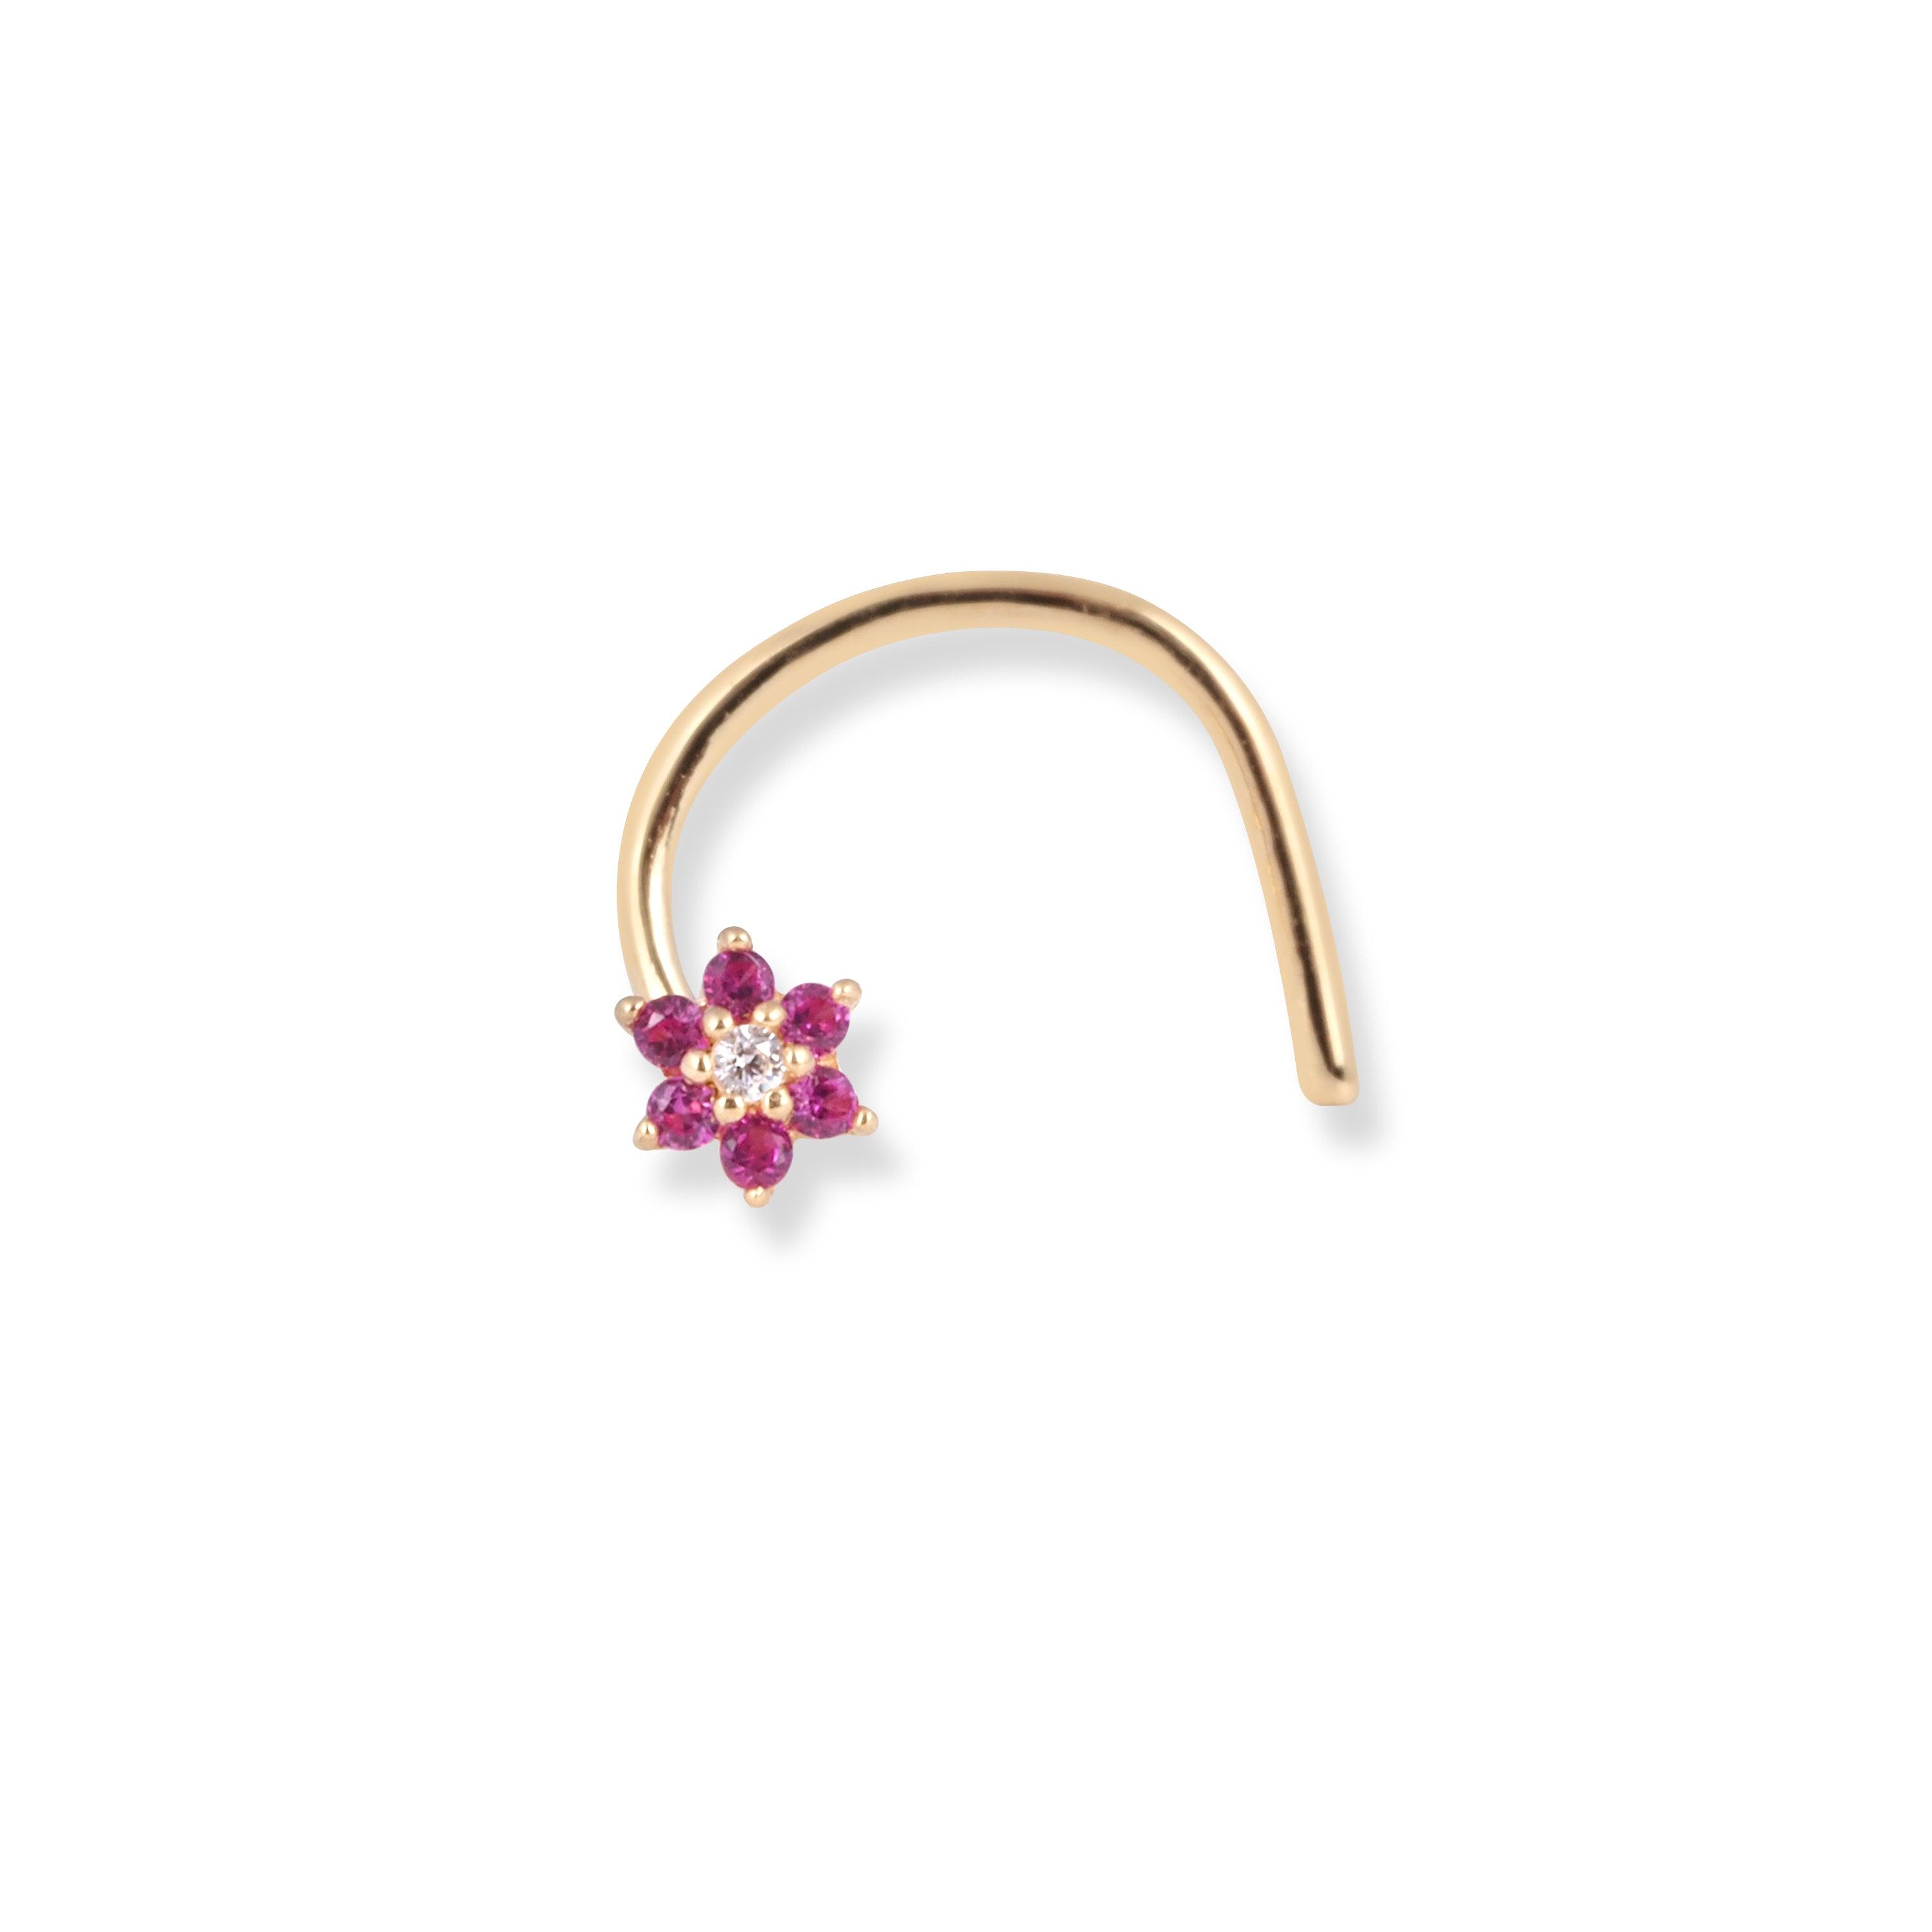 18ct Yellow Gold Flower Design Wire Back Nose Stud with 1 White & 6 Pink Cubic Zirconia Stones NS-7569 - Minar Jewellers